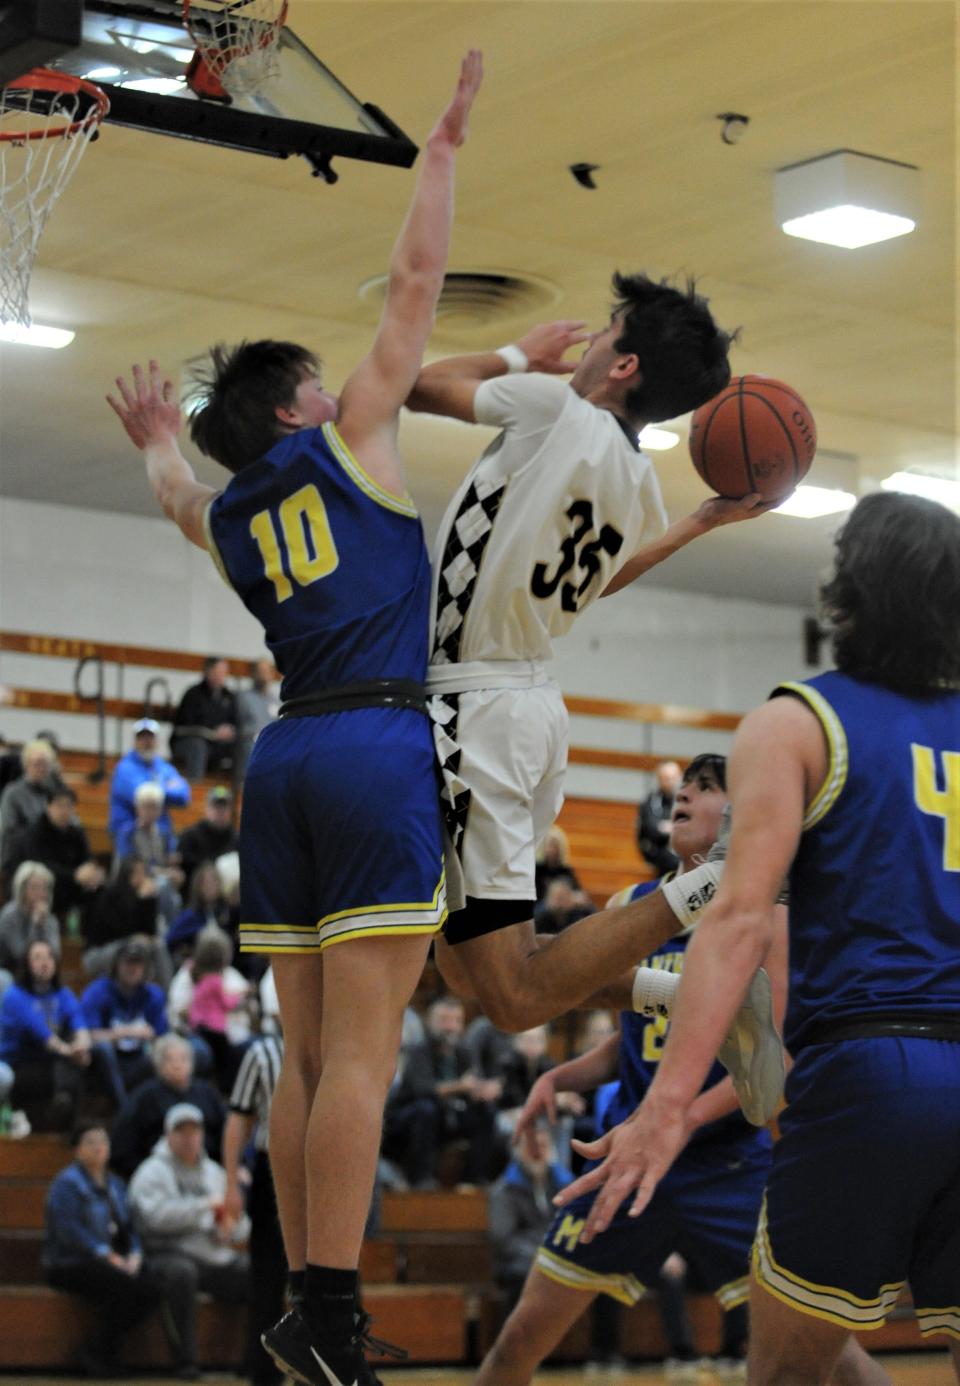 River View's Owen Emig tries to put a shot over Maysville's Coen Fink in a game last season. Emig and Brody Border will carry the load for the Black Bears, who have several new faces expected to contribute.